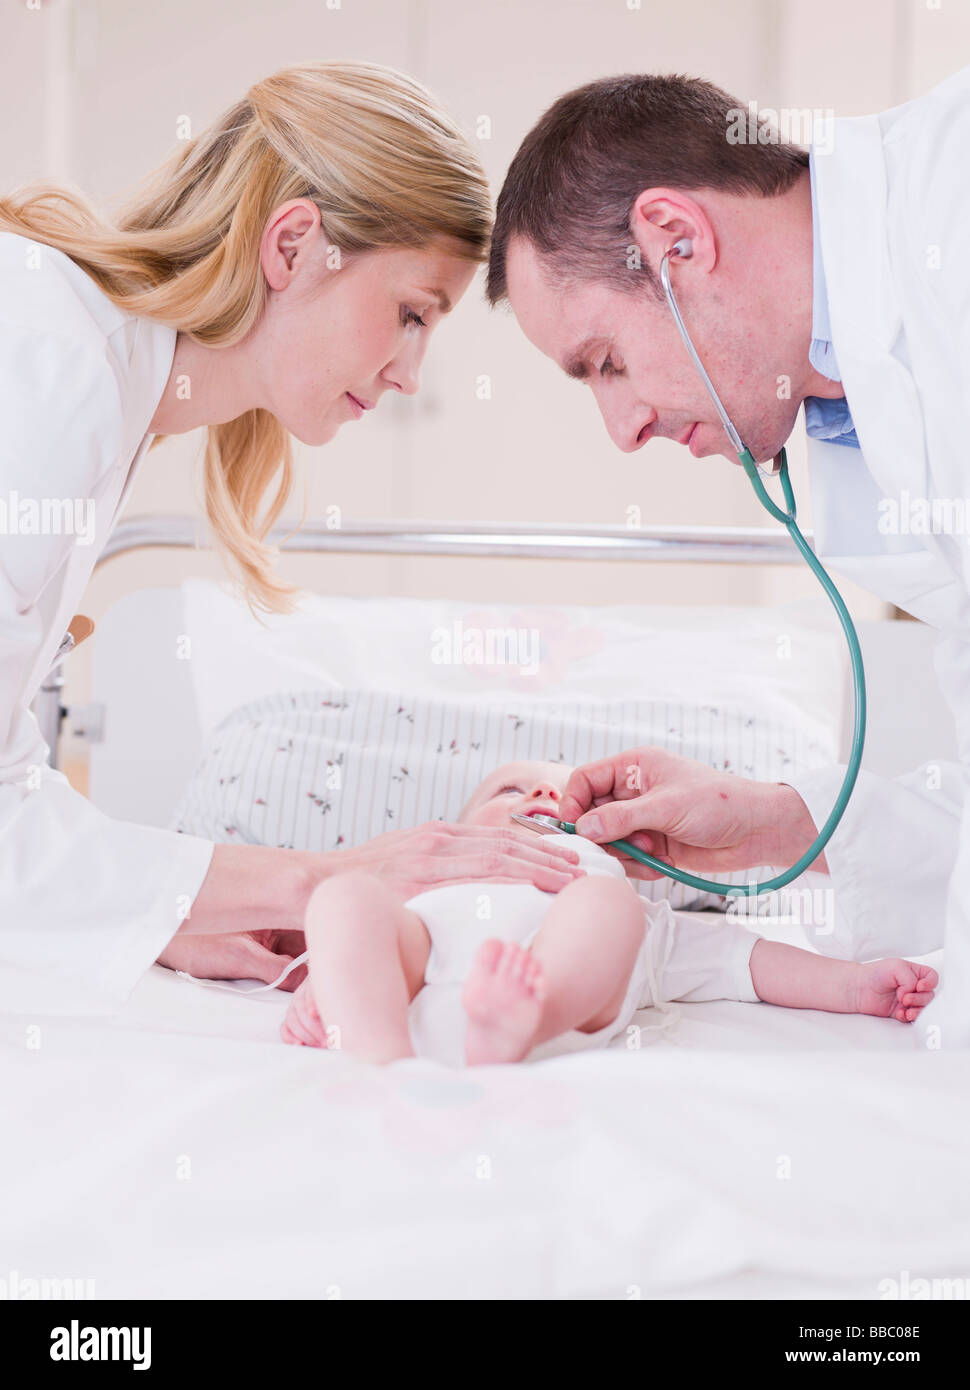 two medics tending to a child Stock Photo